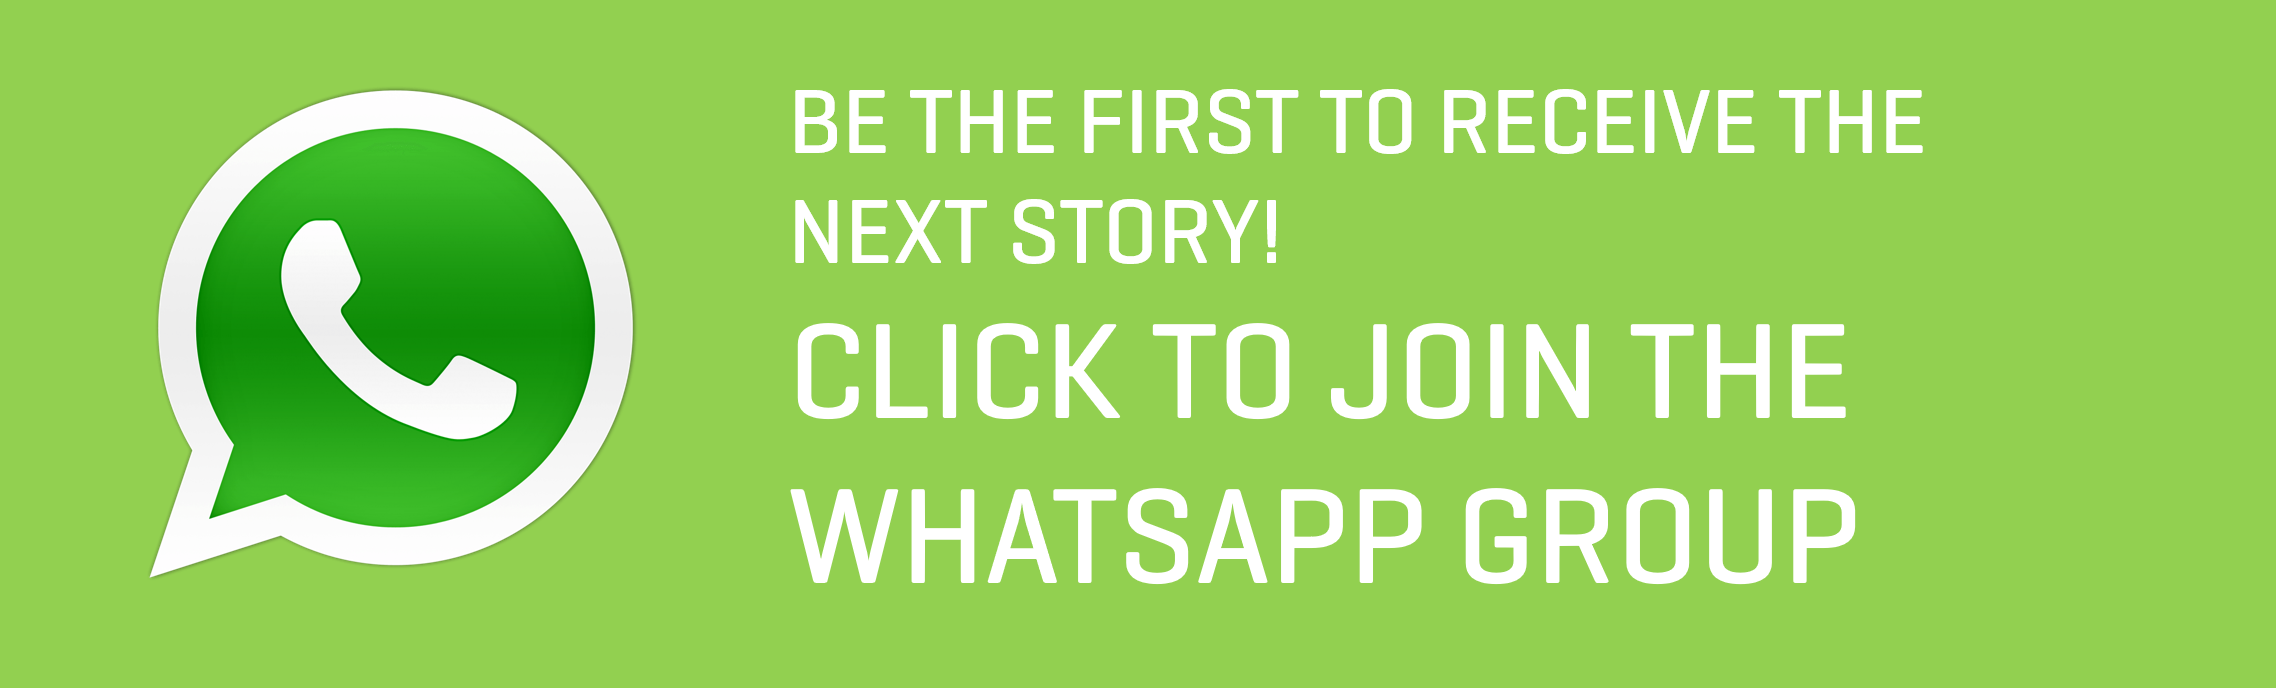 Click to join the WhatsApp group